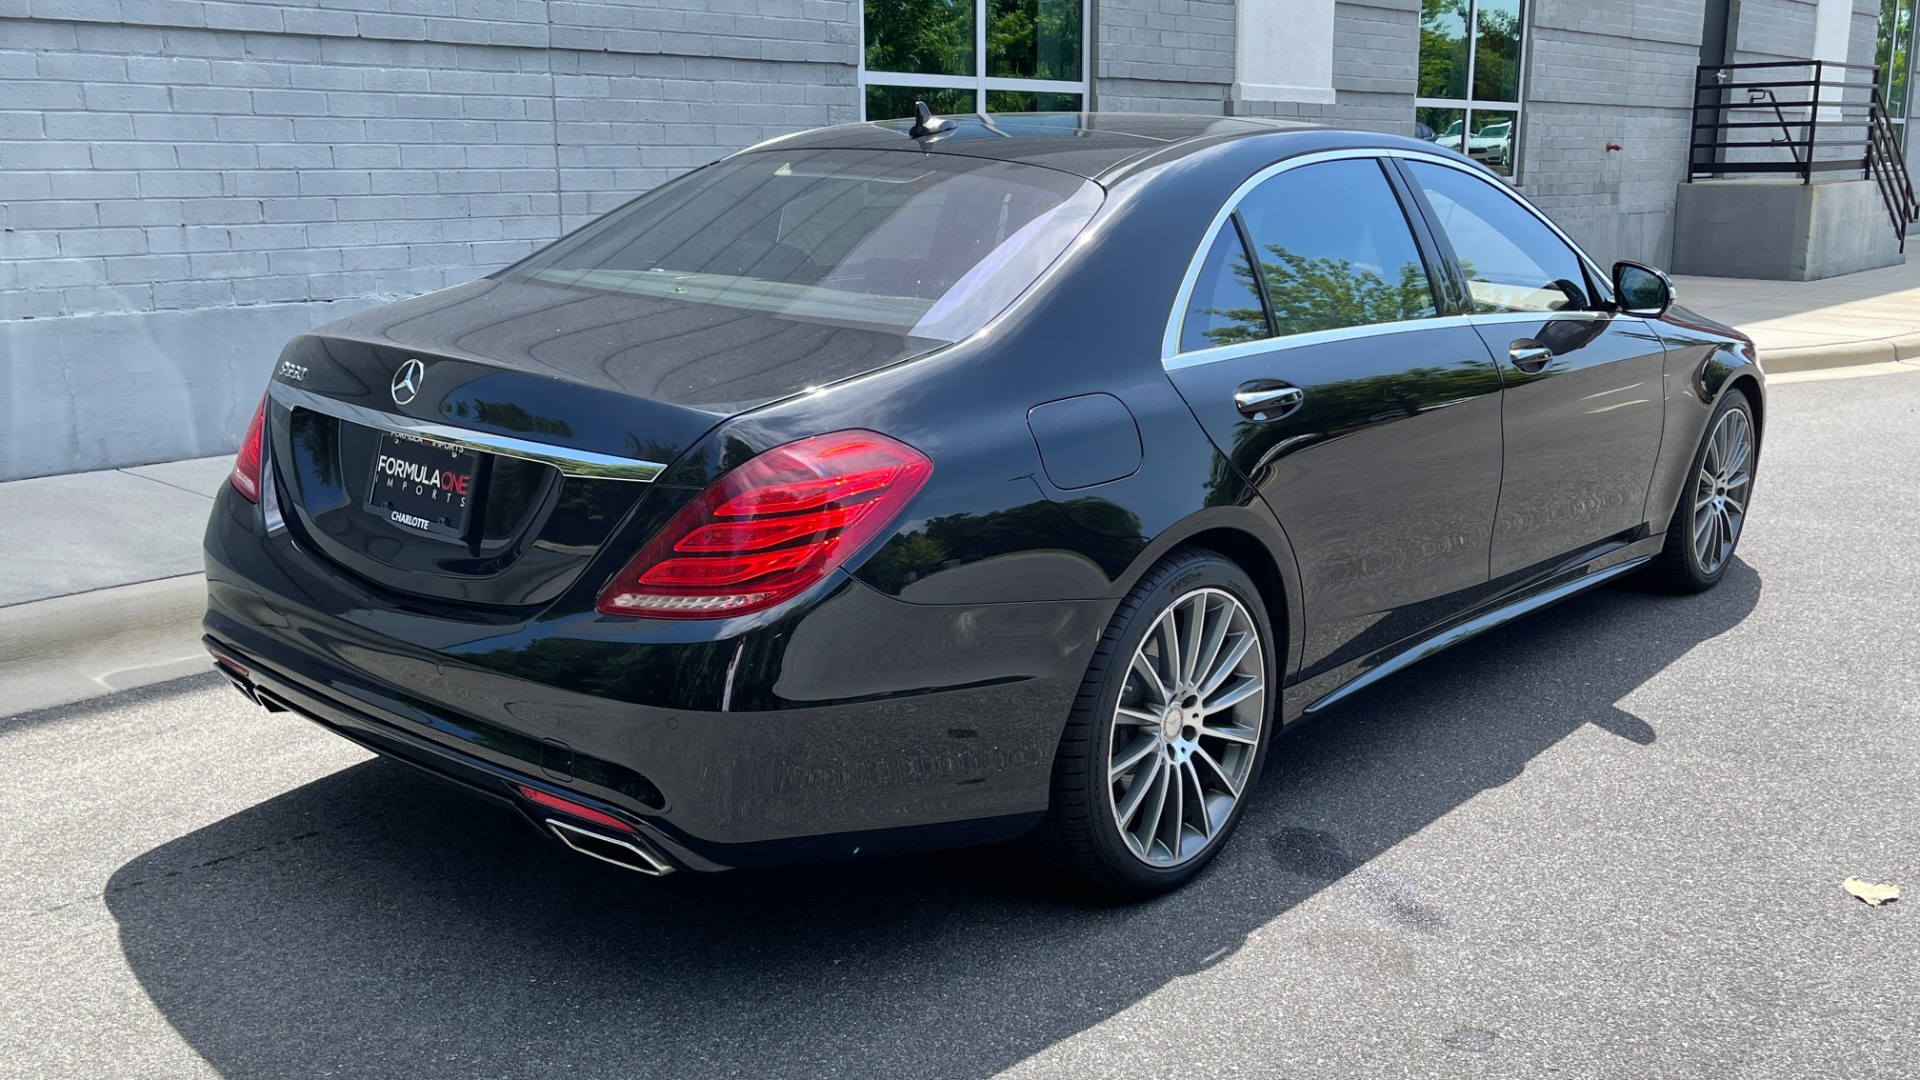 Used 2015 Mercedes-Benz S-Class S550 / 20IN AMG WHEELS / SPORT / COMFORT / PREMIUM / DRIVER ASSIST for sale $38,595 at Formula Imports in Charlotte NC 28227 6